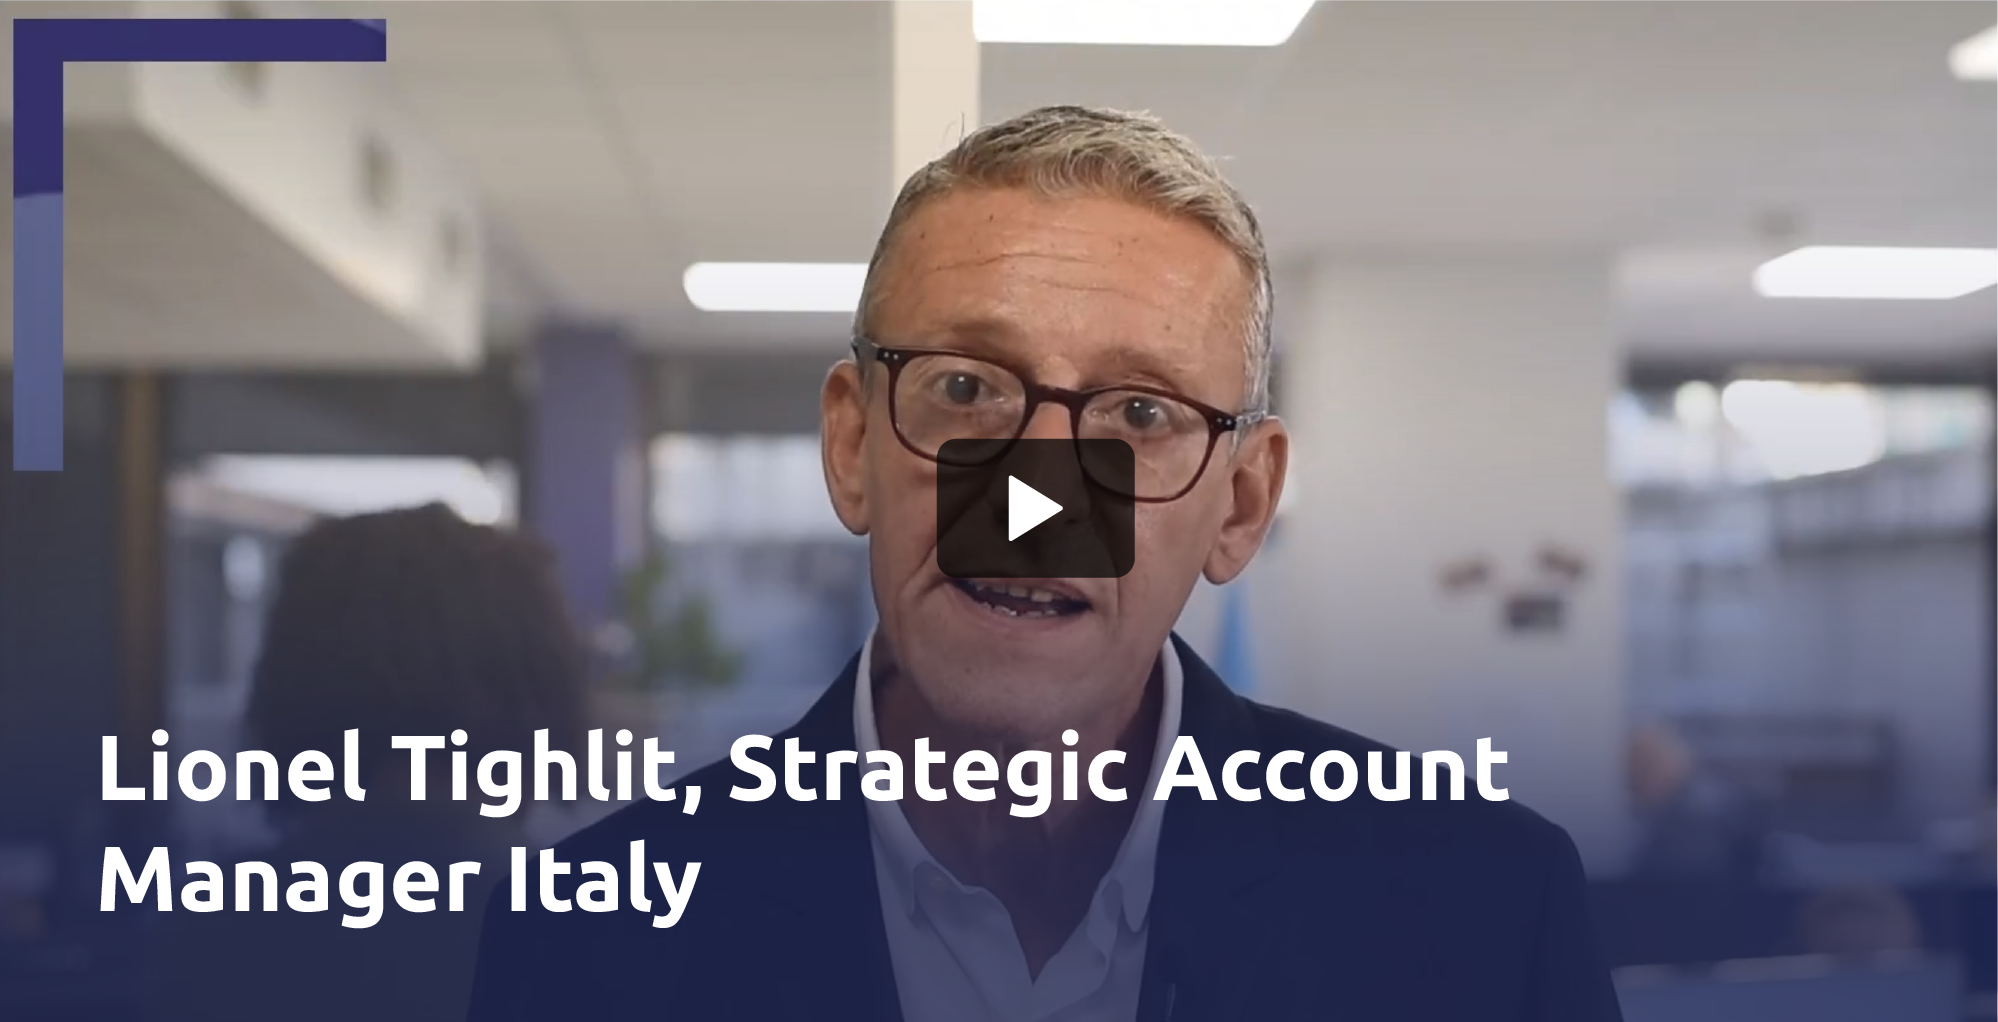 Lionel Tighlit, Strategic Account Manager Italy